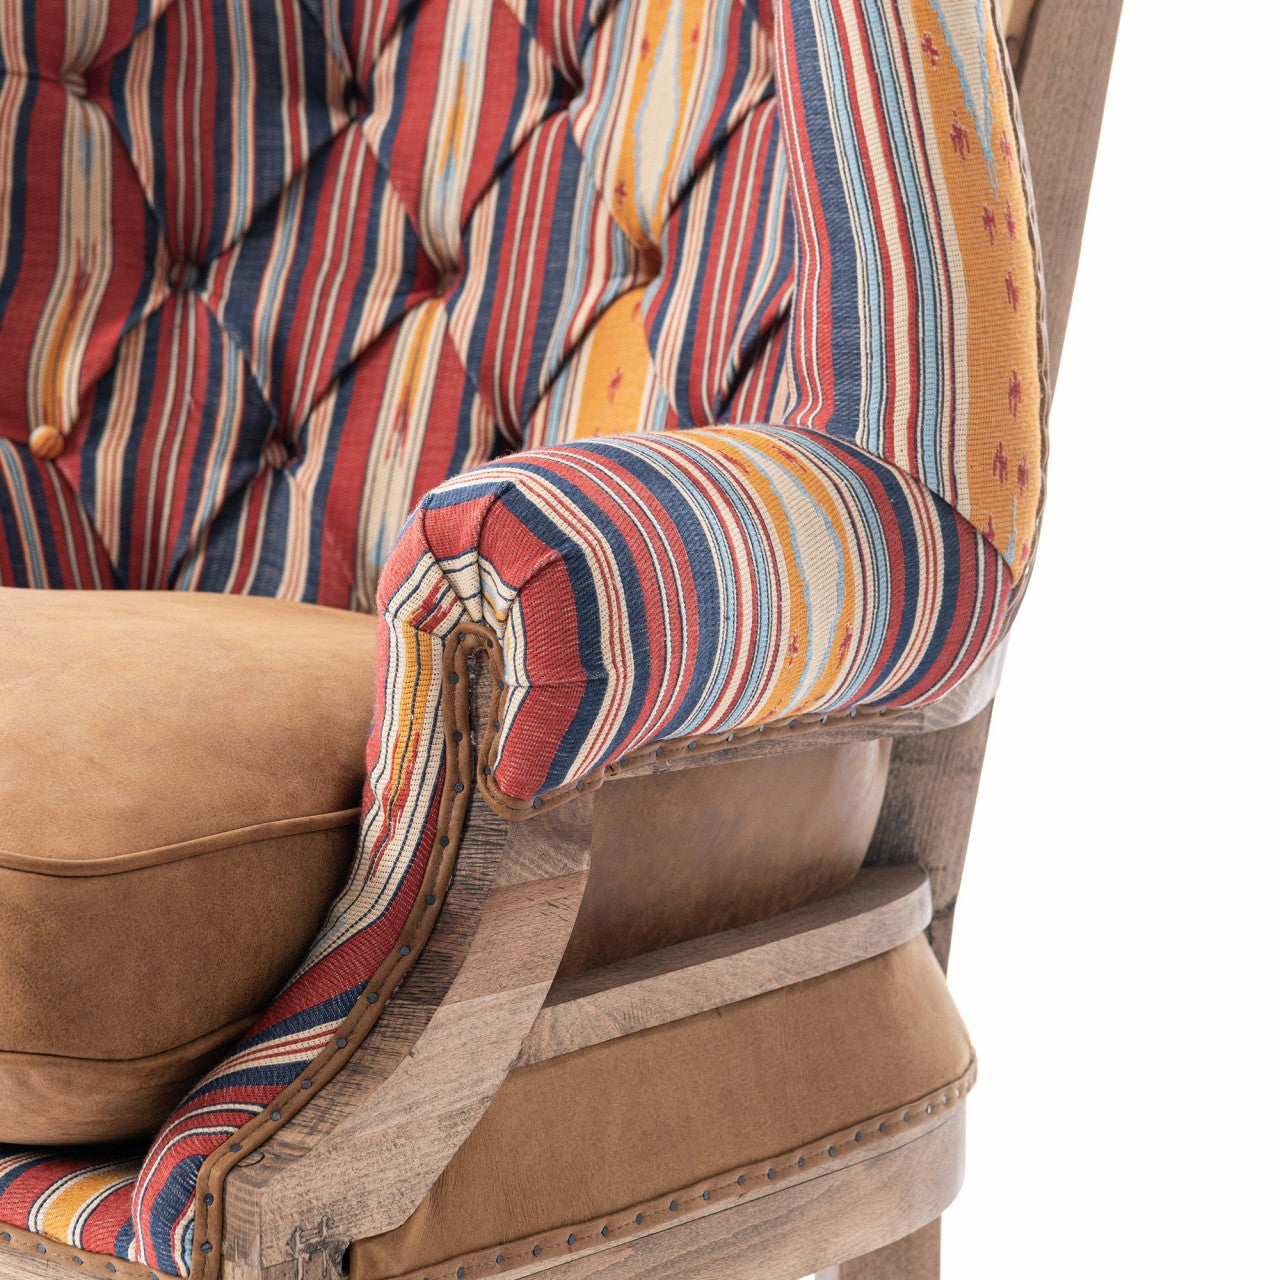 WILLIAM DECONSTRUCTED WING CHAIR (Leather seat cushion) - NEYSHABOUR Woven Fabric_Furniture_Mindthegap